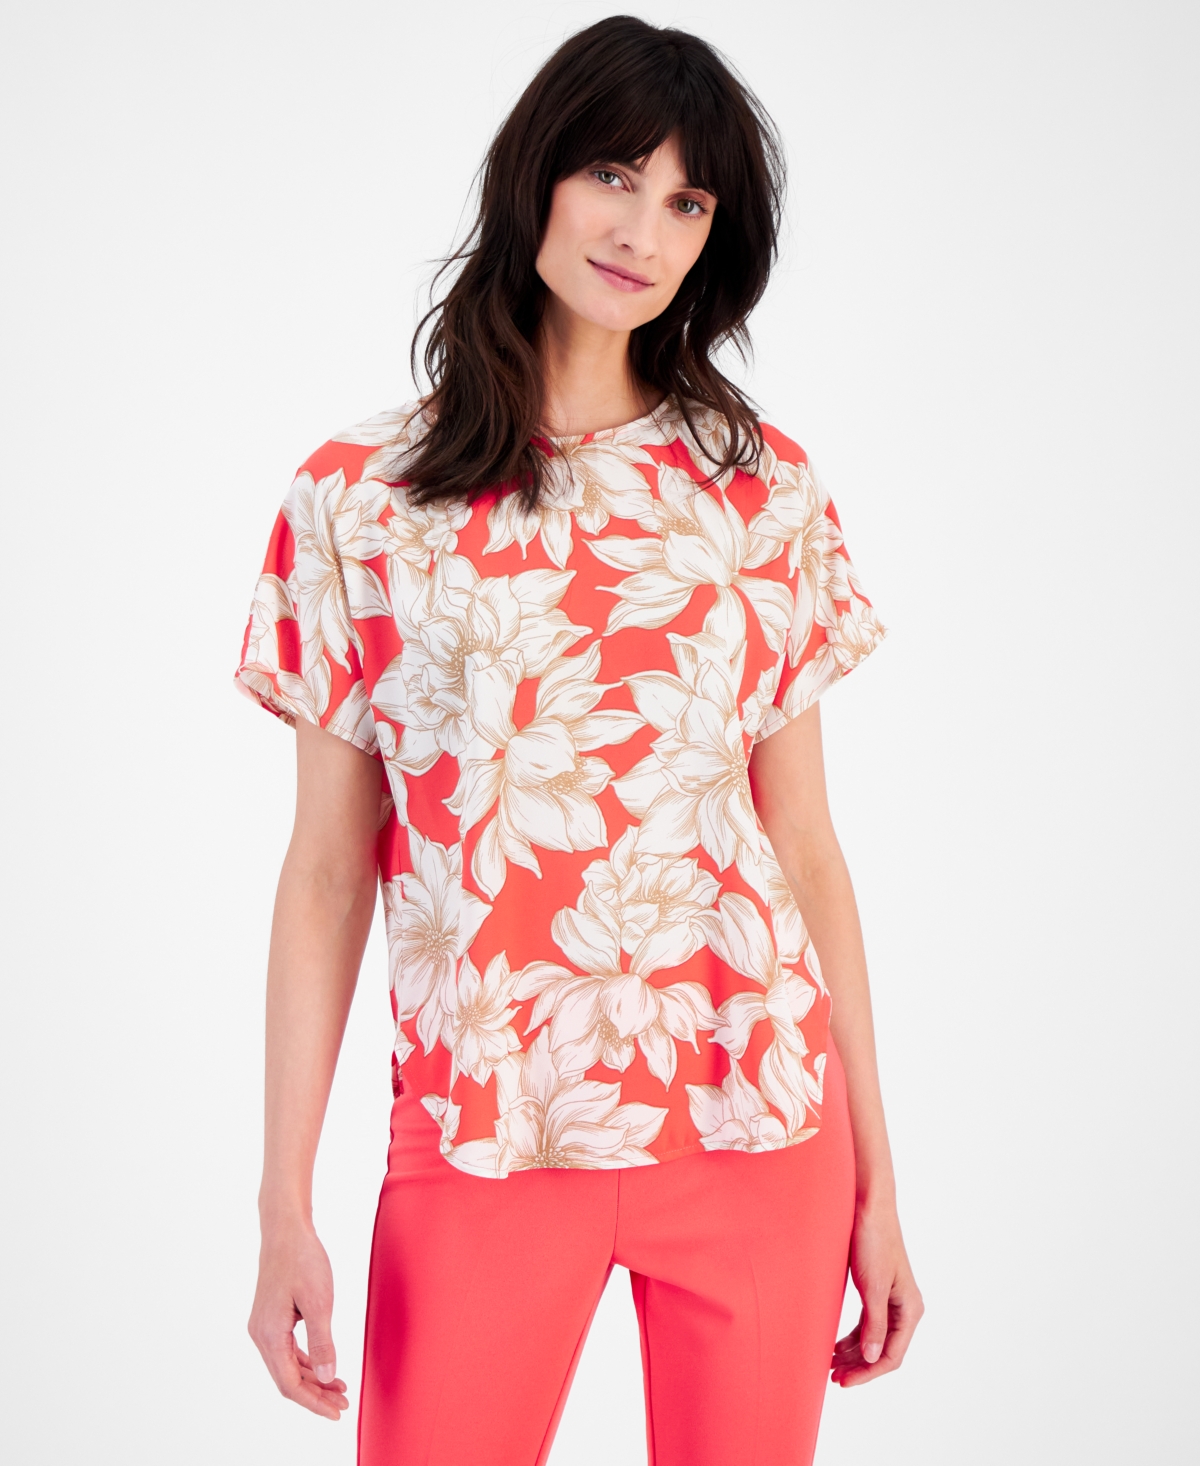 Women's Floral-Print Short-Sleeve Blouse - RED PEAR/BROWN